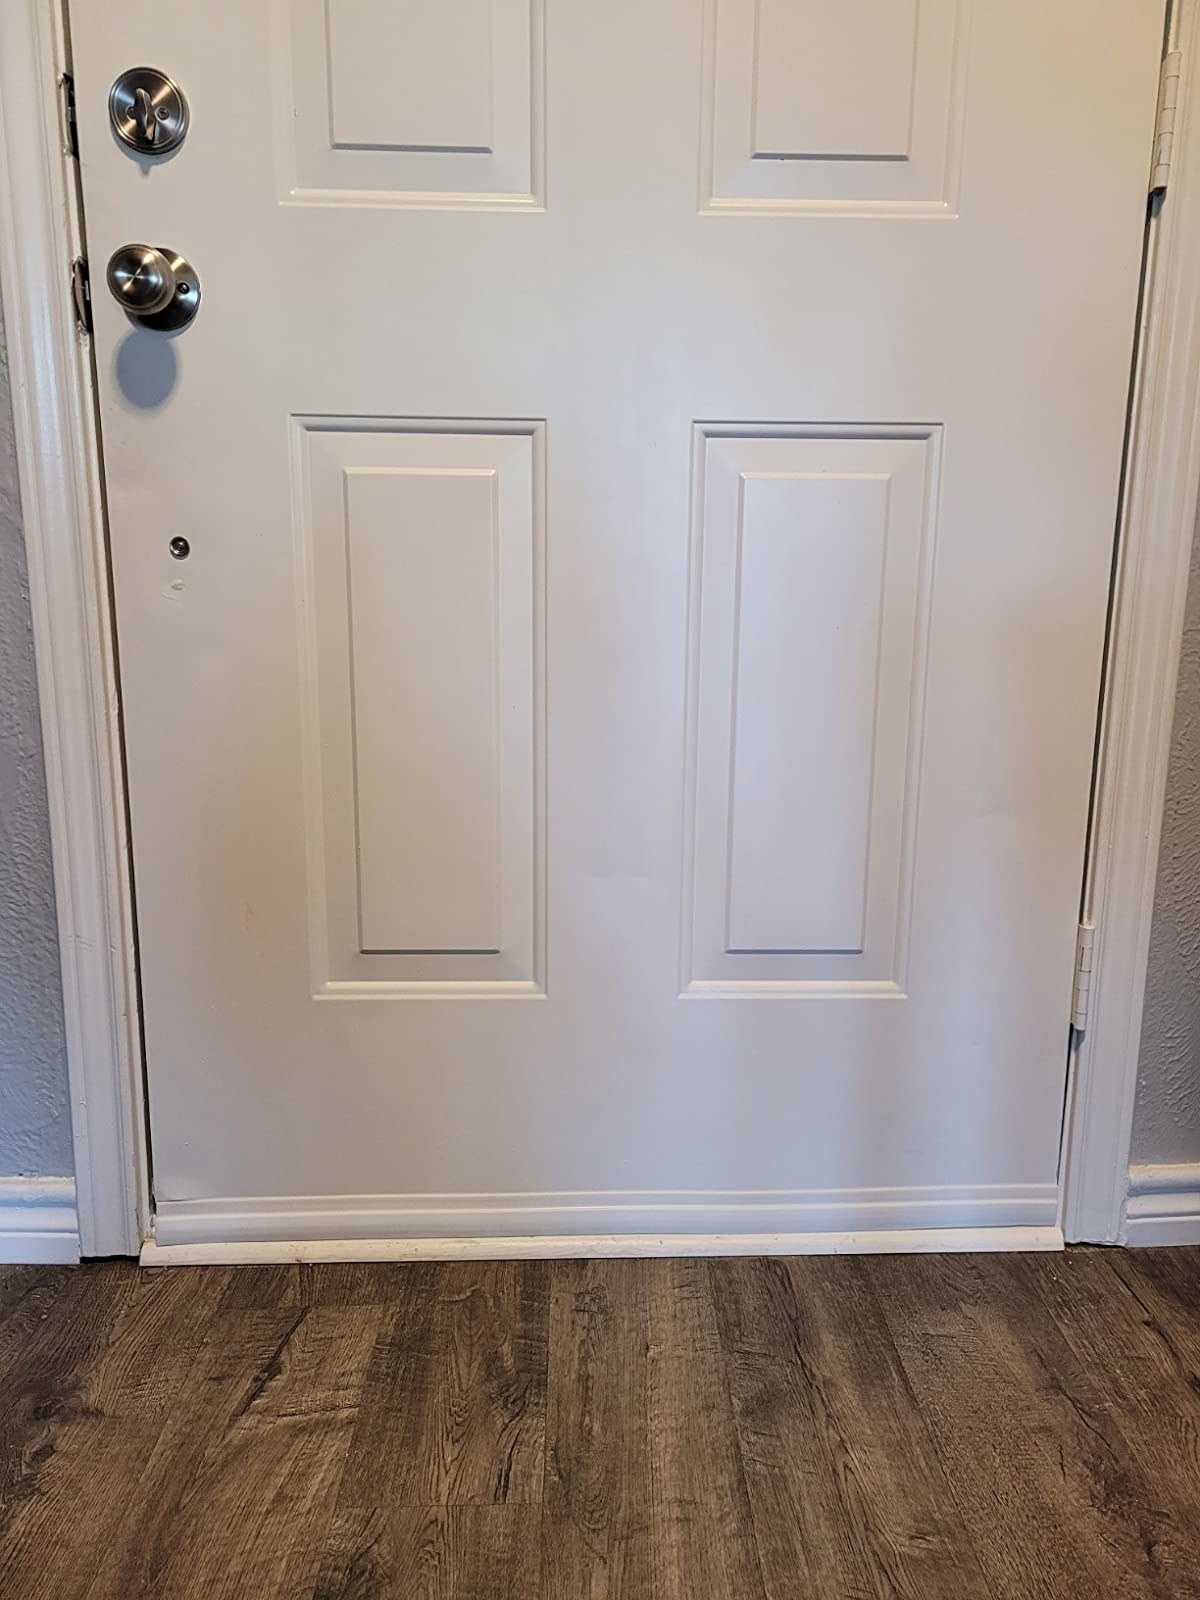 A white draft stopper on a white door